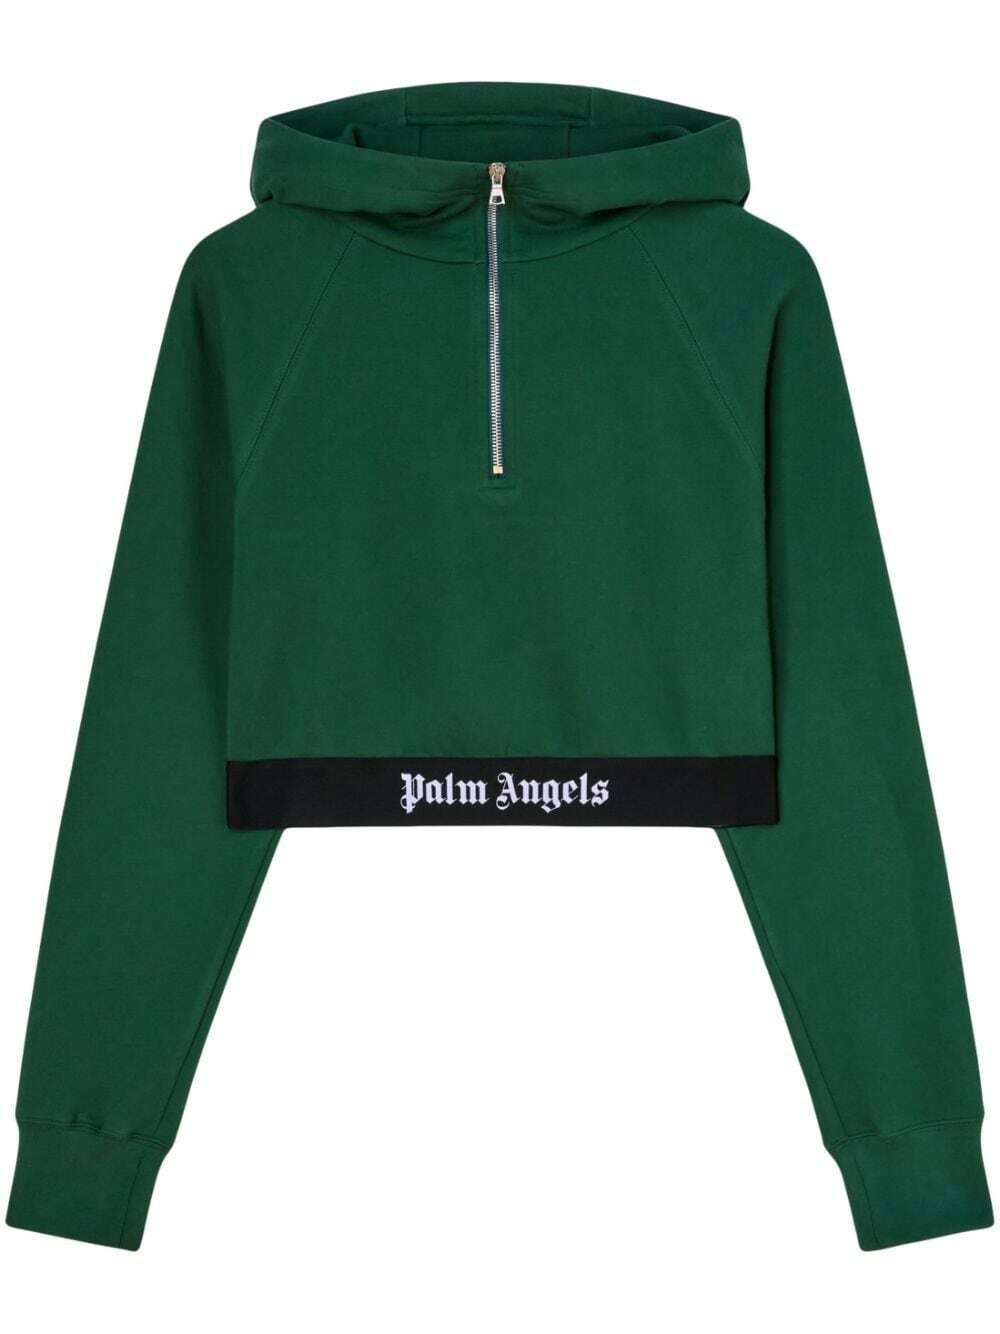 Palm Angels Black and Yellow Los Angeles Sprayed Hoodie Palm Angels